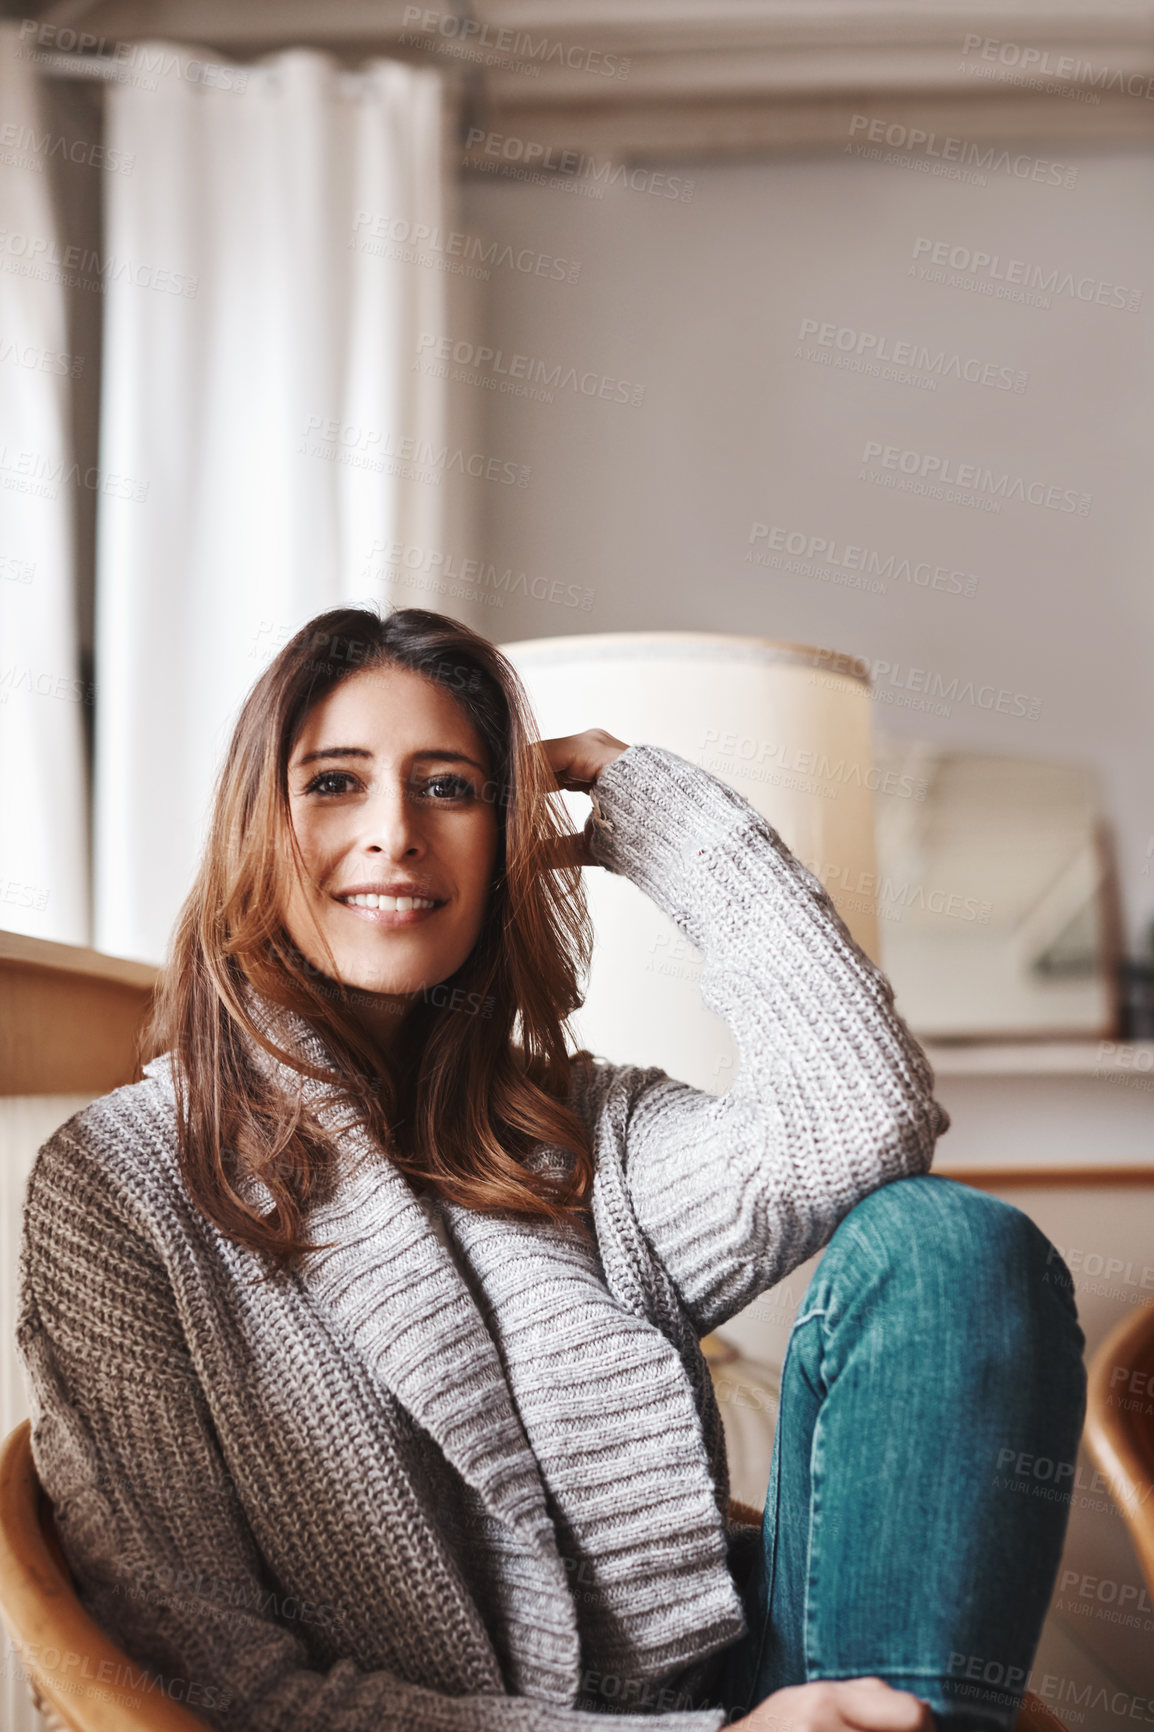 Buy stock photo Portrait of an attractive young woman relaxing on a chair at home